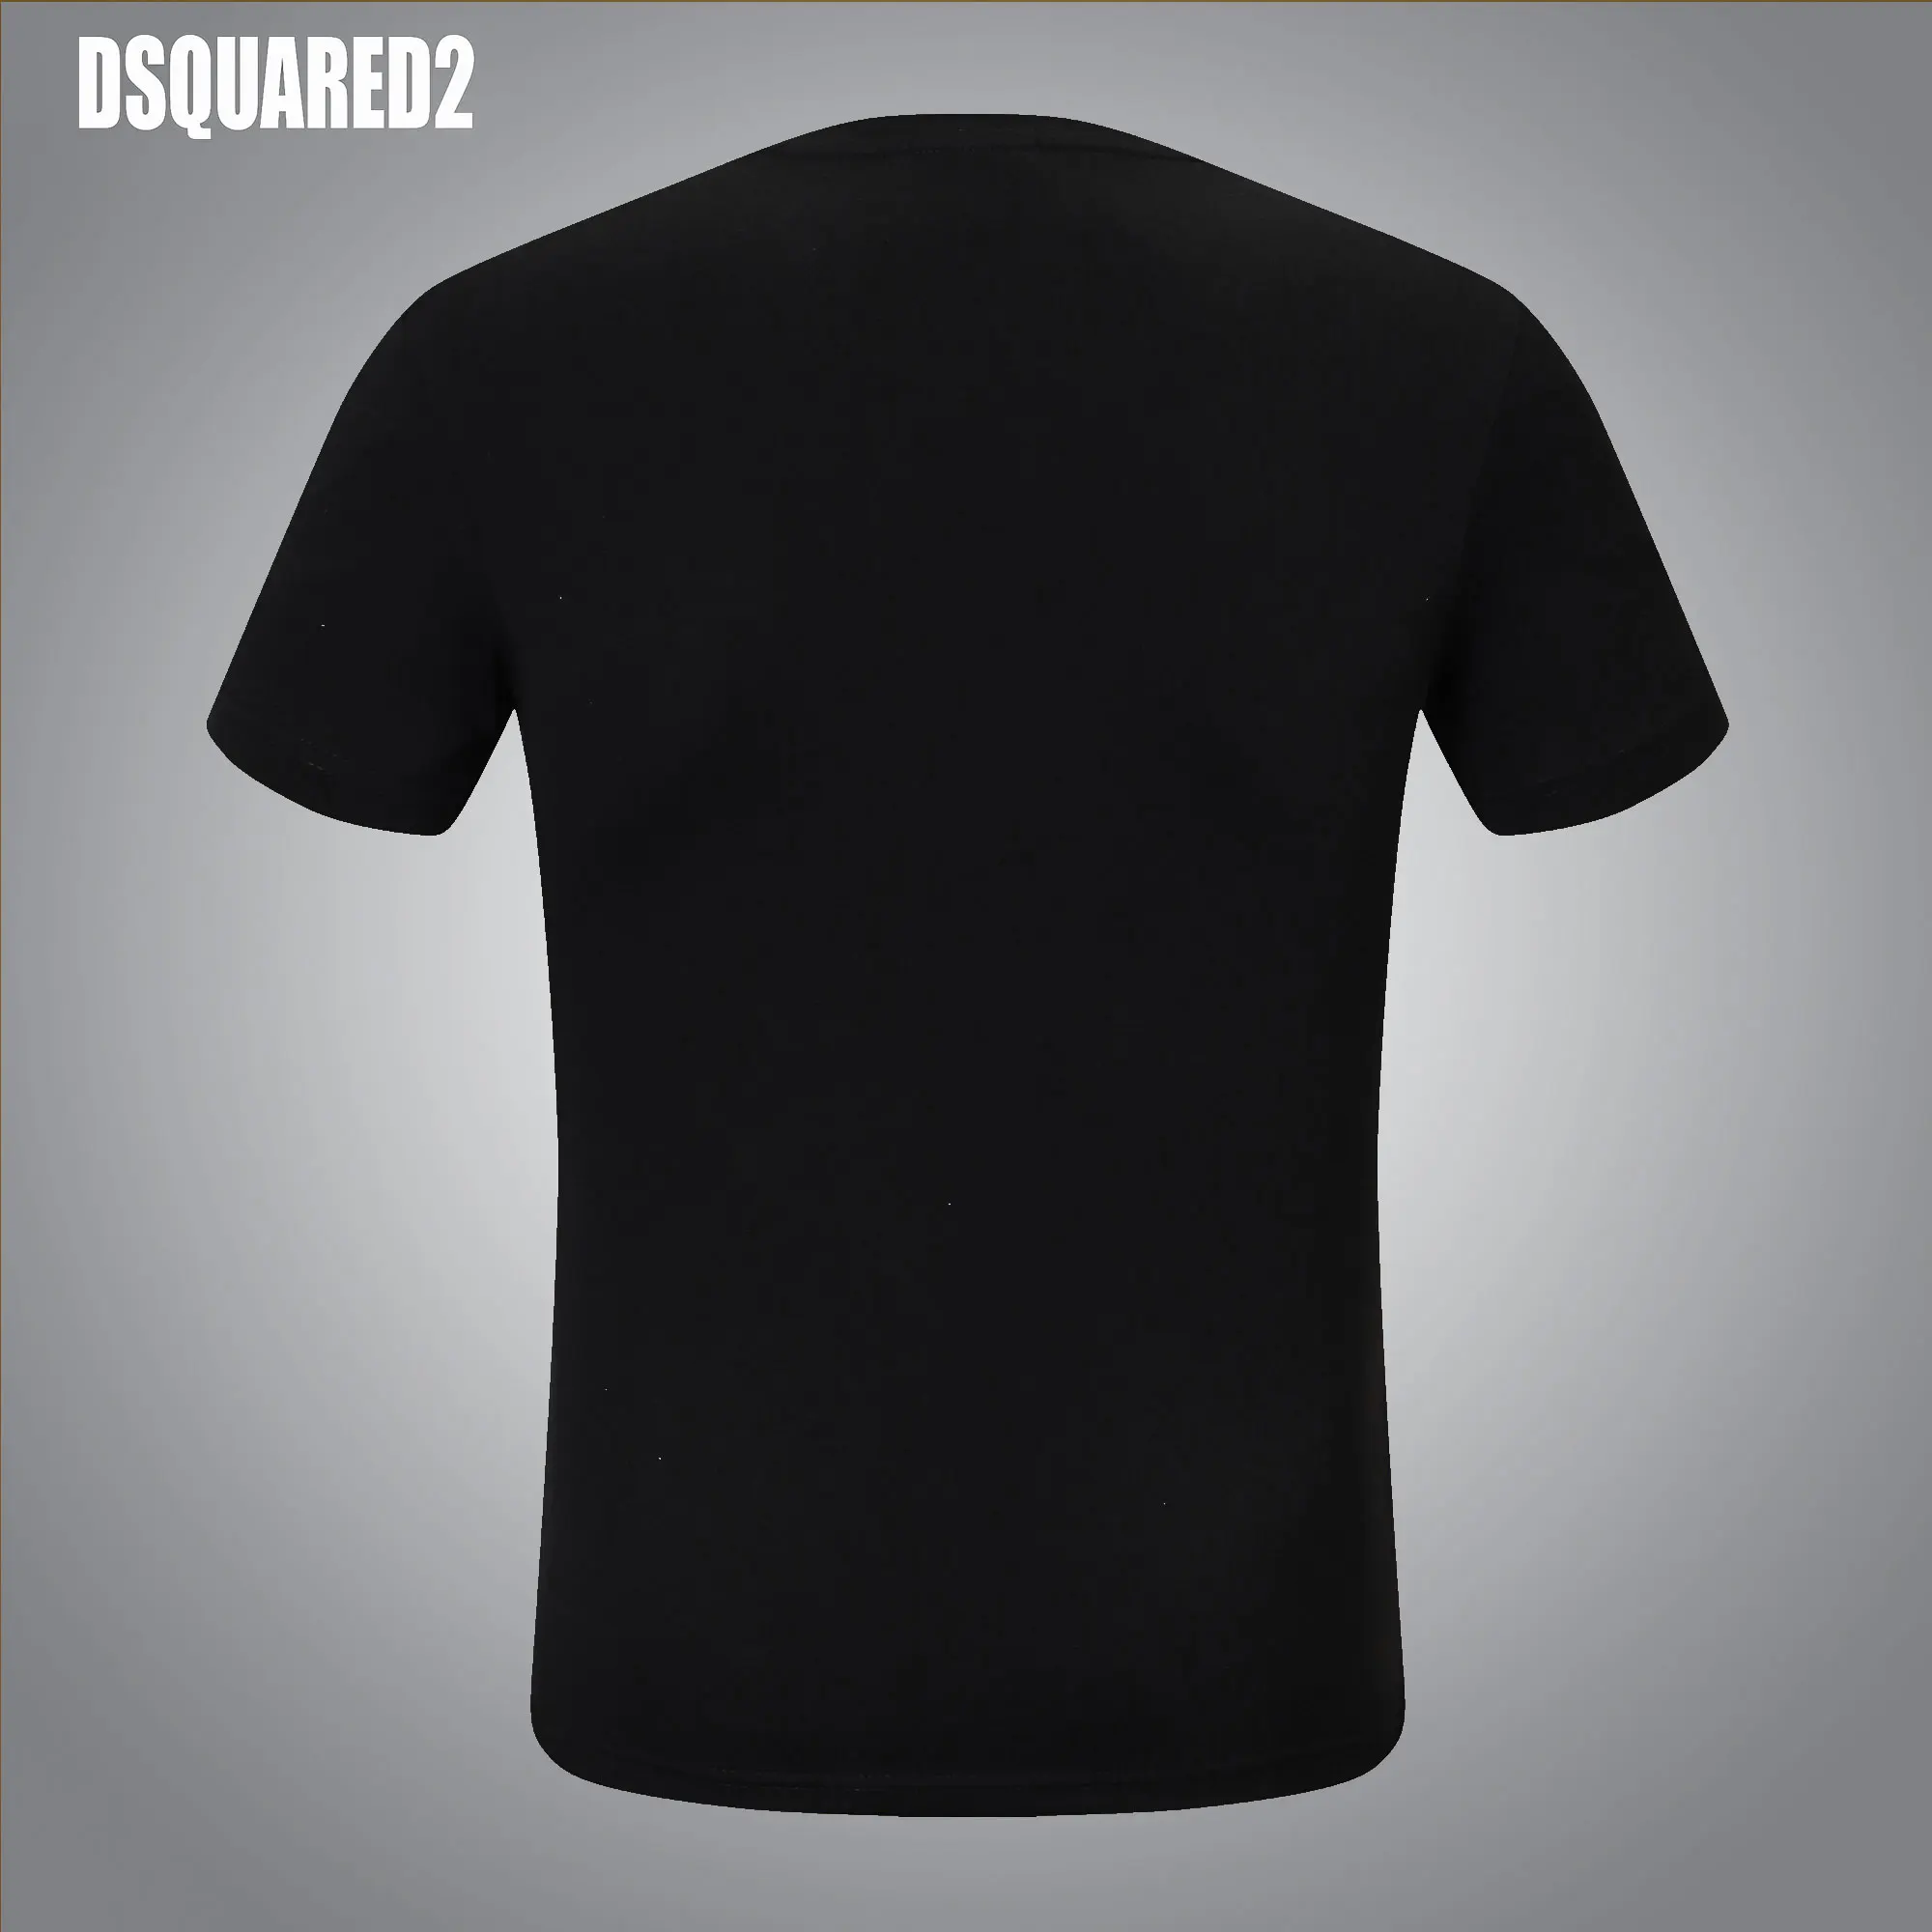 hot 2021 summer new brand dsquared2 letter printed t shirt mens casual fashion loose breathable oversized tops m xxxl free global shipping